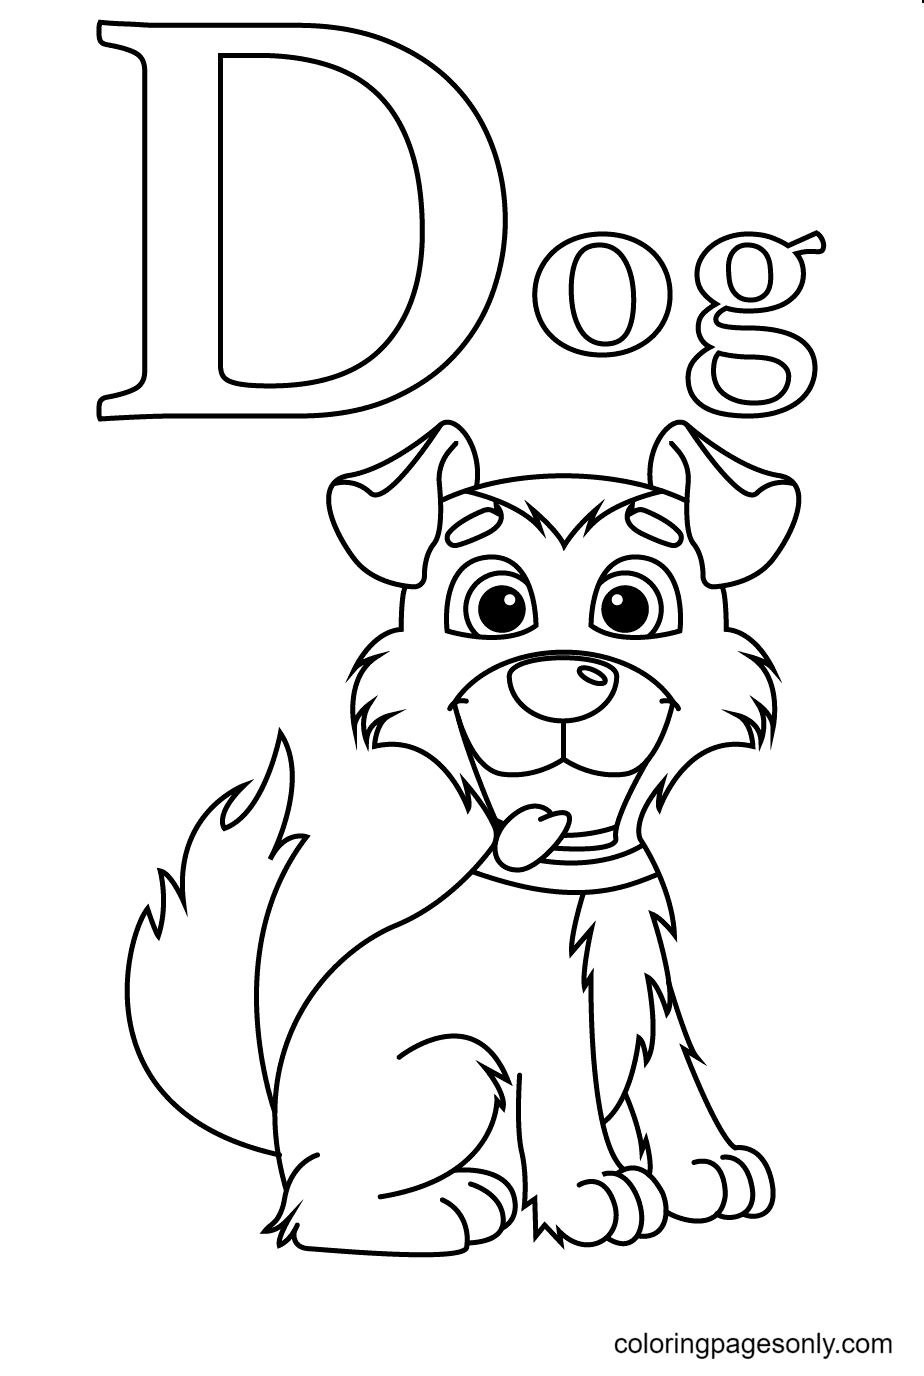 Adorable Dog With Letter D Coloring Pages